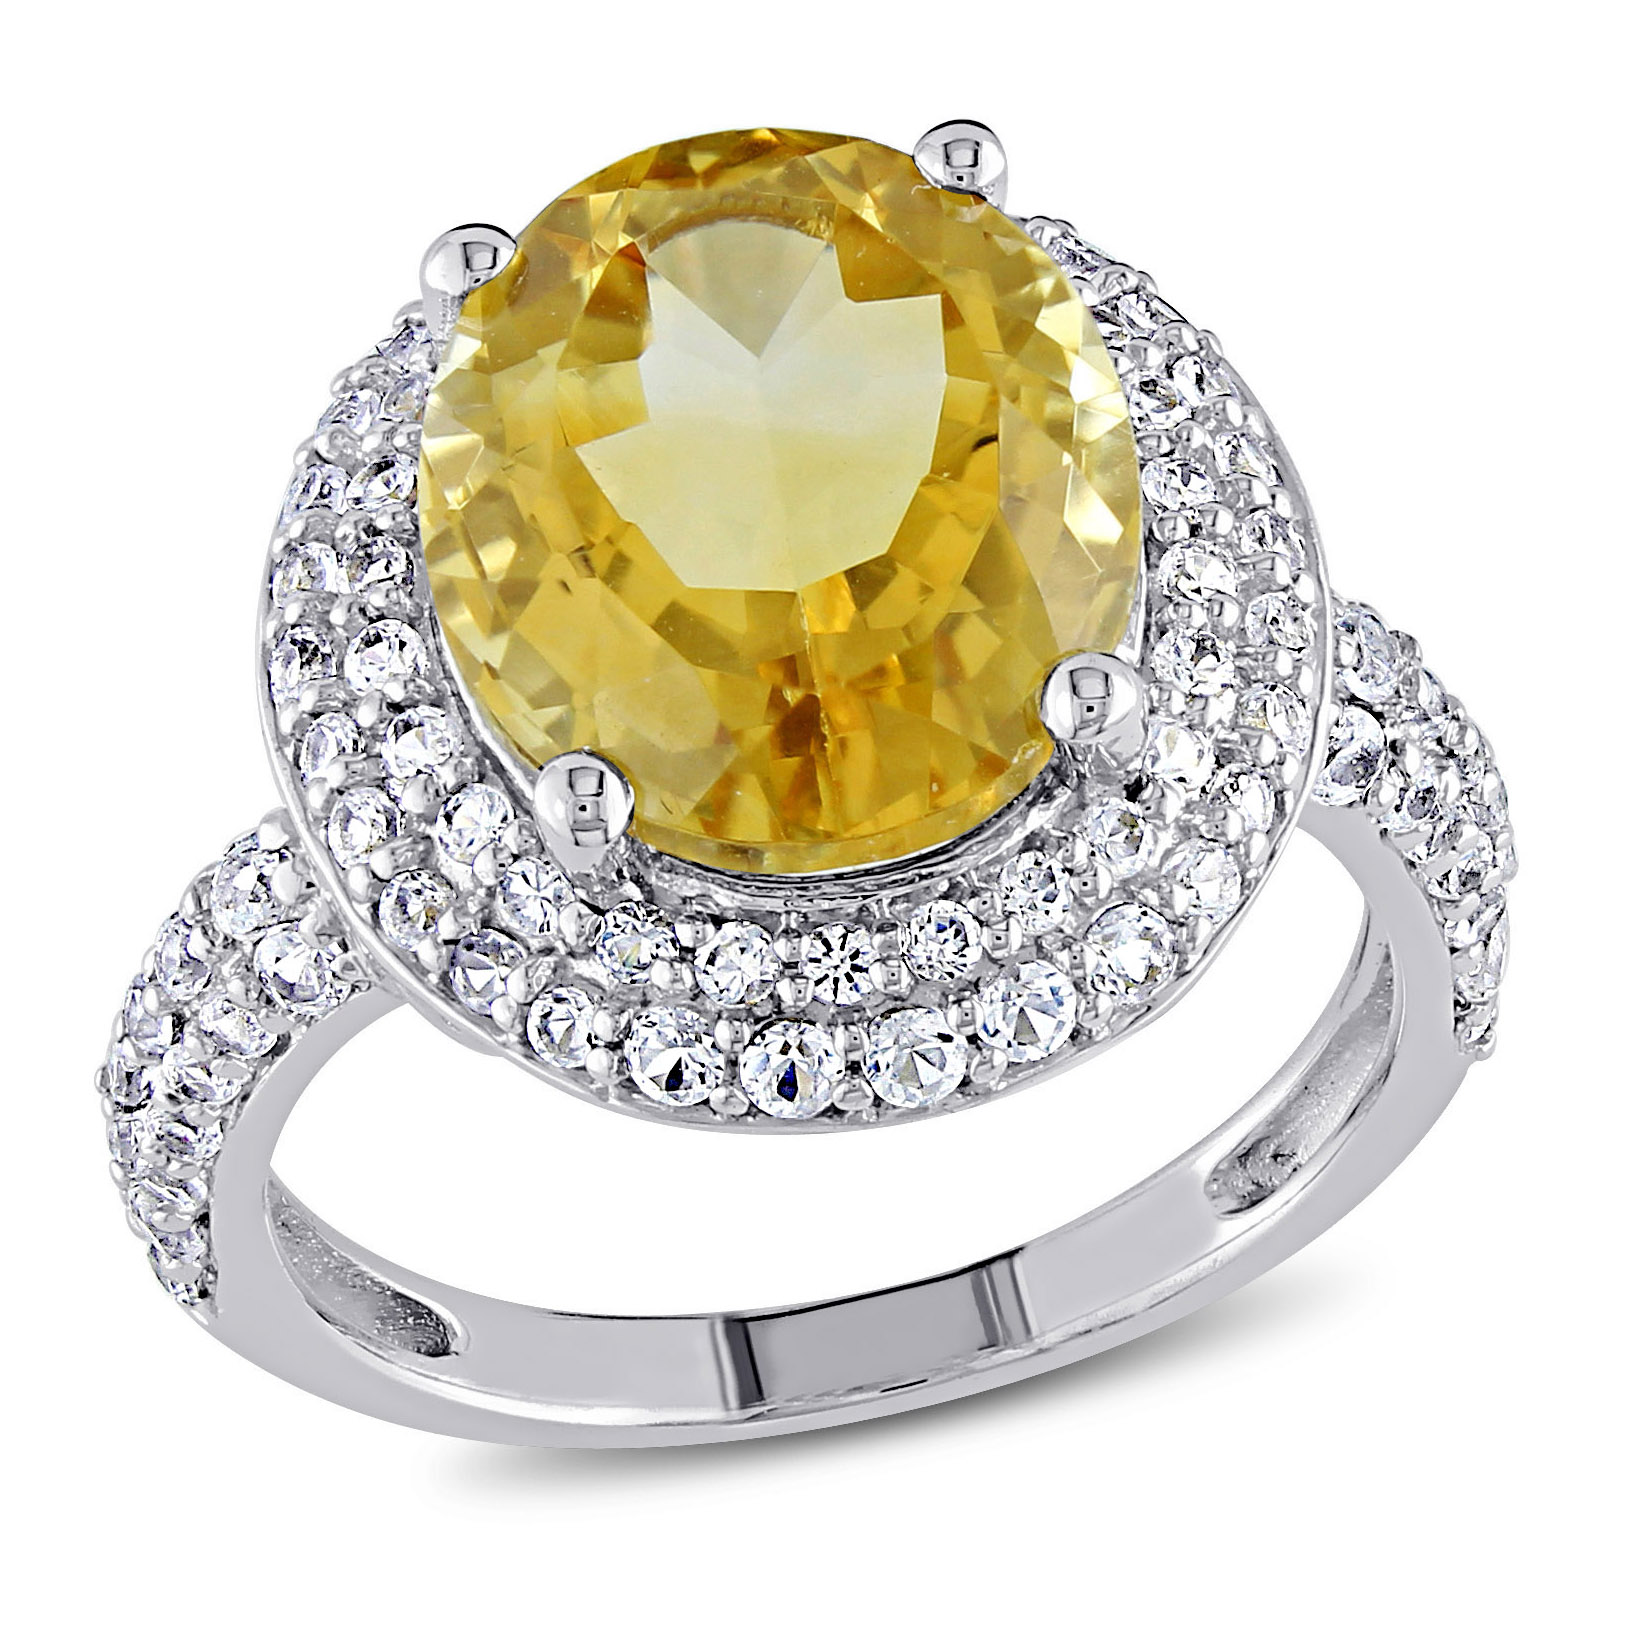 5 2/5 CT TGW Oval Cut Citrine and Created White Sapphire Double Halo Ring in Sterling Silver